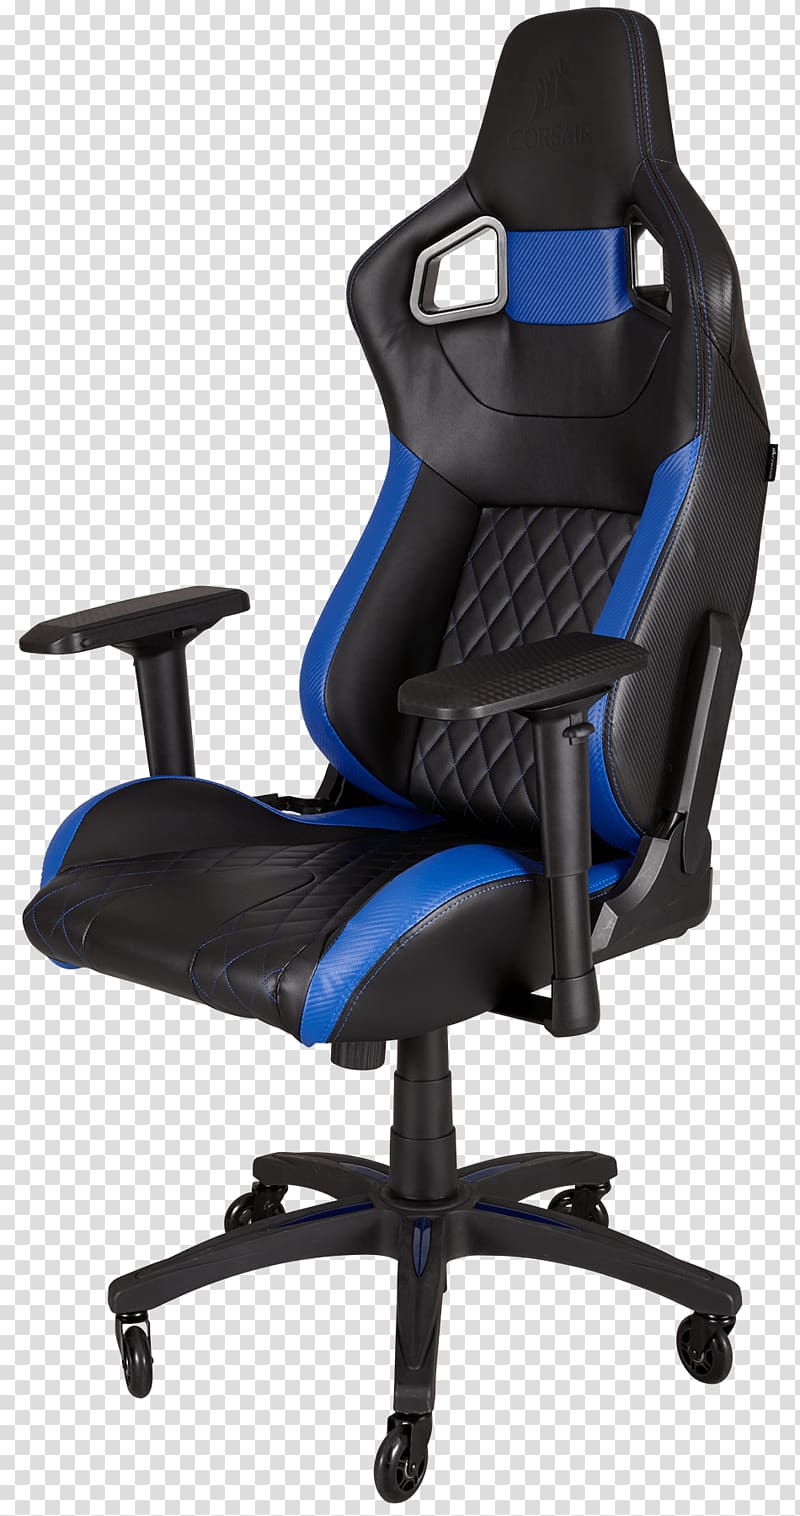 Gaming chair Office & Desk Chairs Furniture DXRacer, chair transparent background PNG clipart